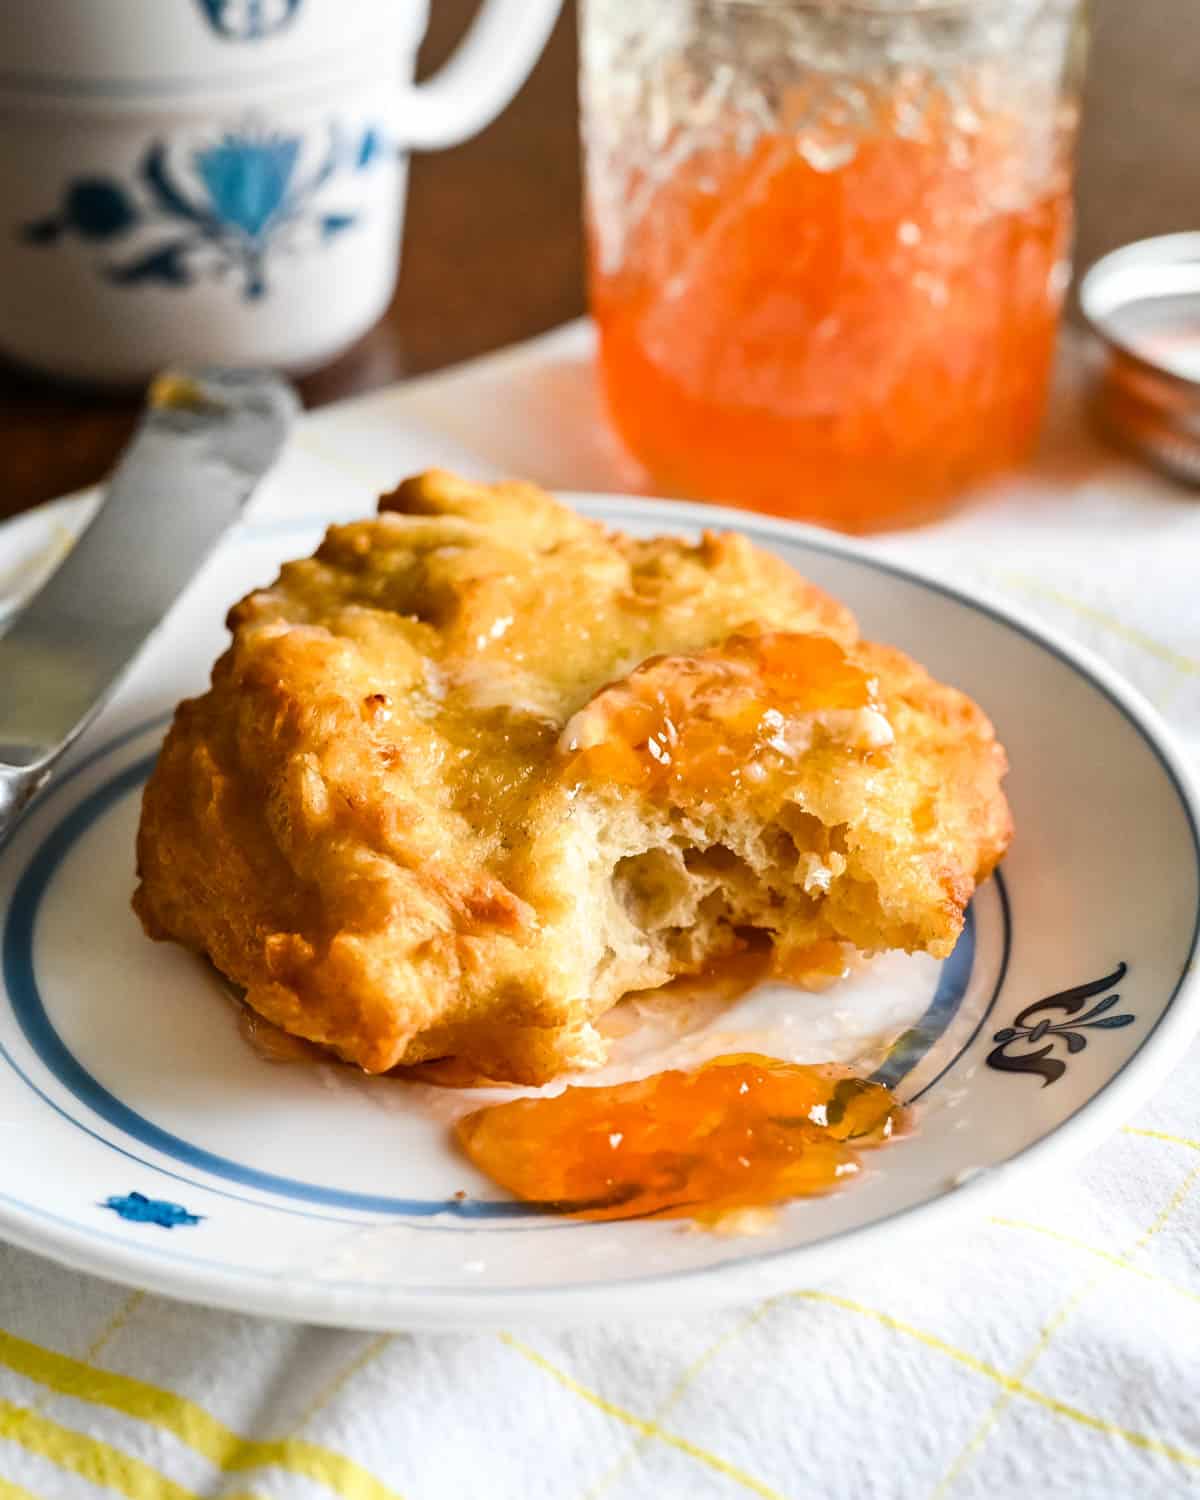 Grandma's fry bread with butter and peach jam.